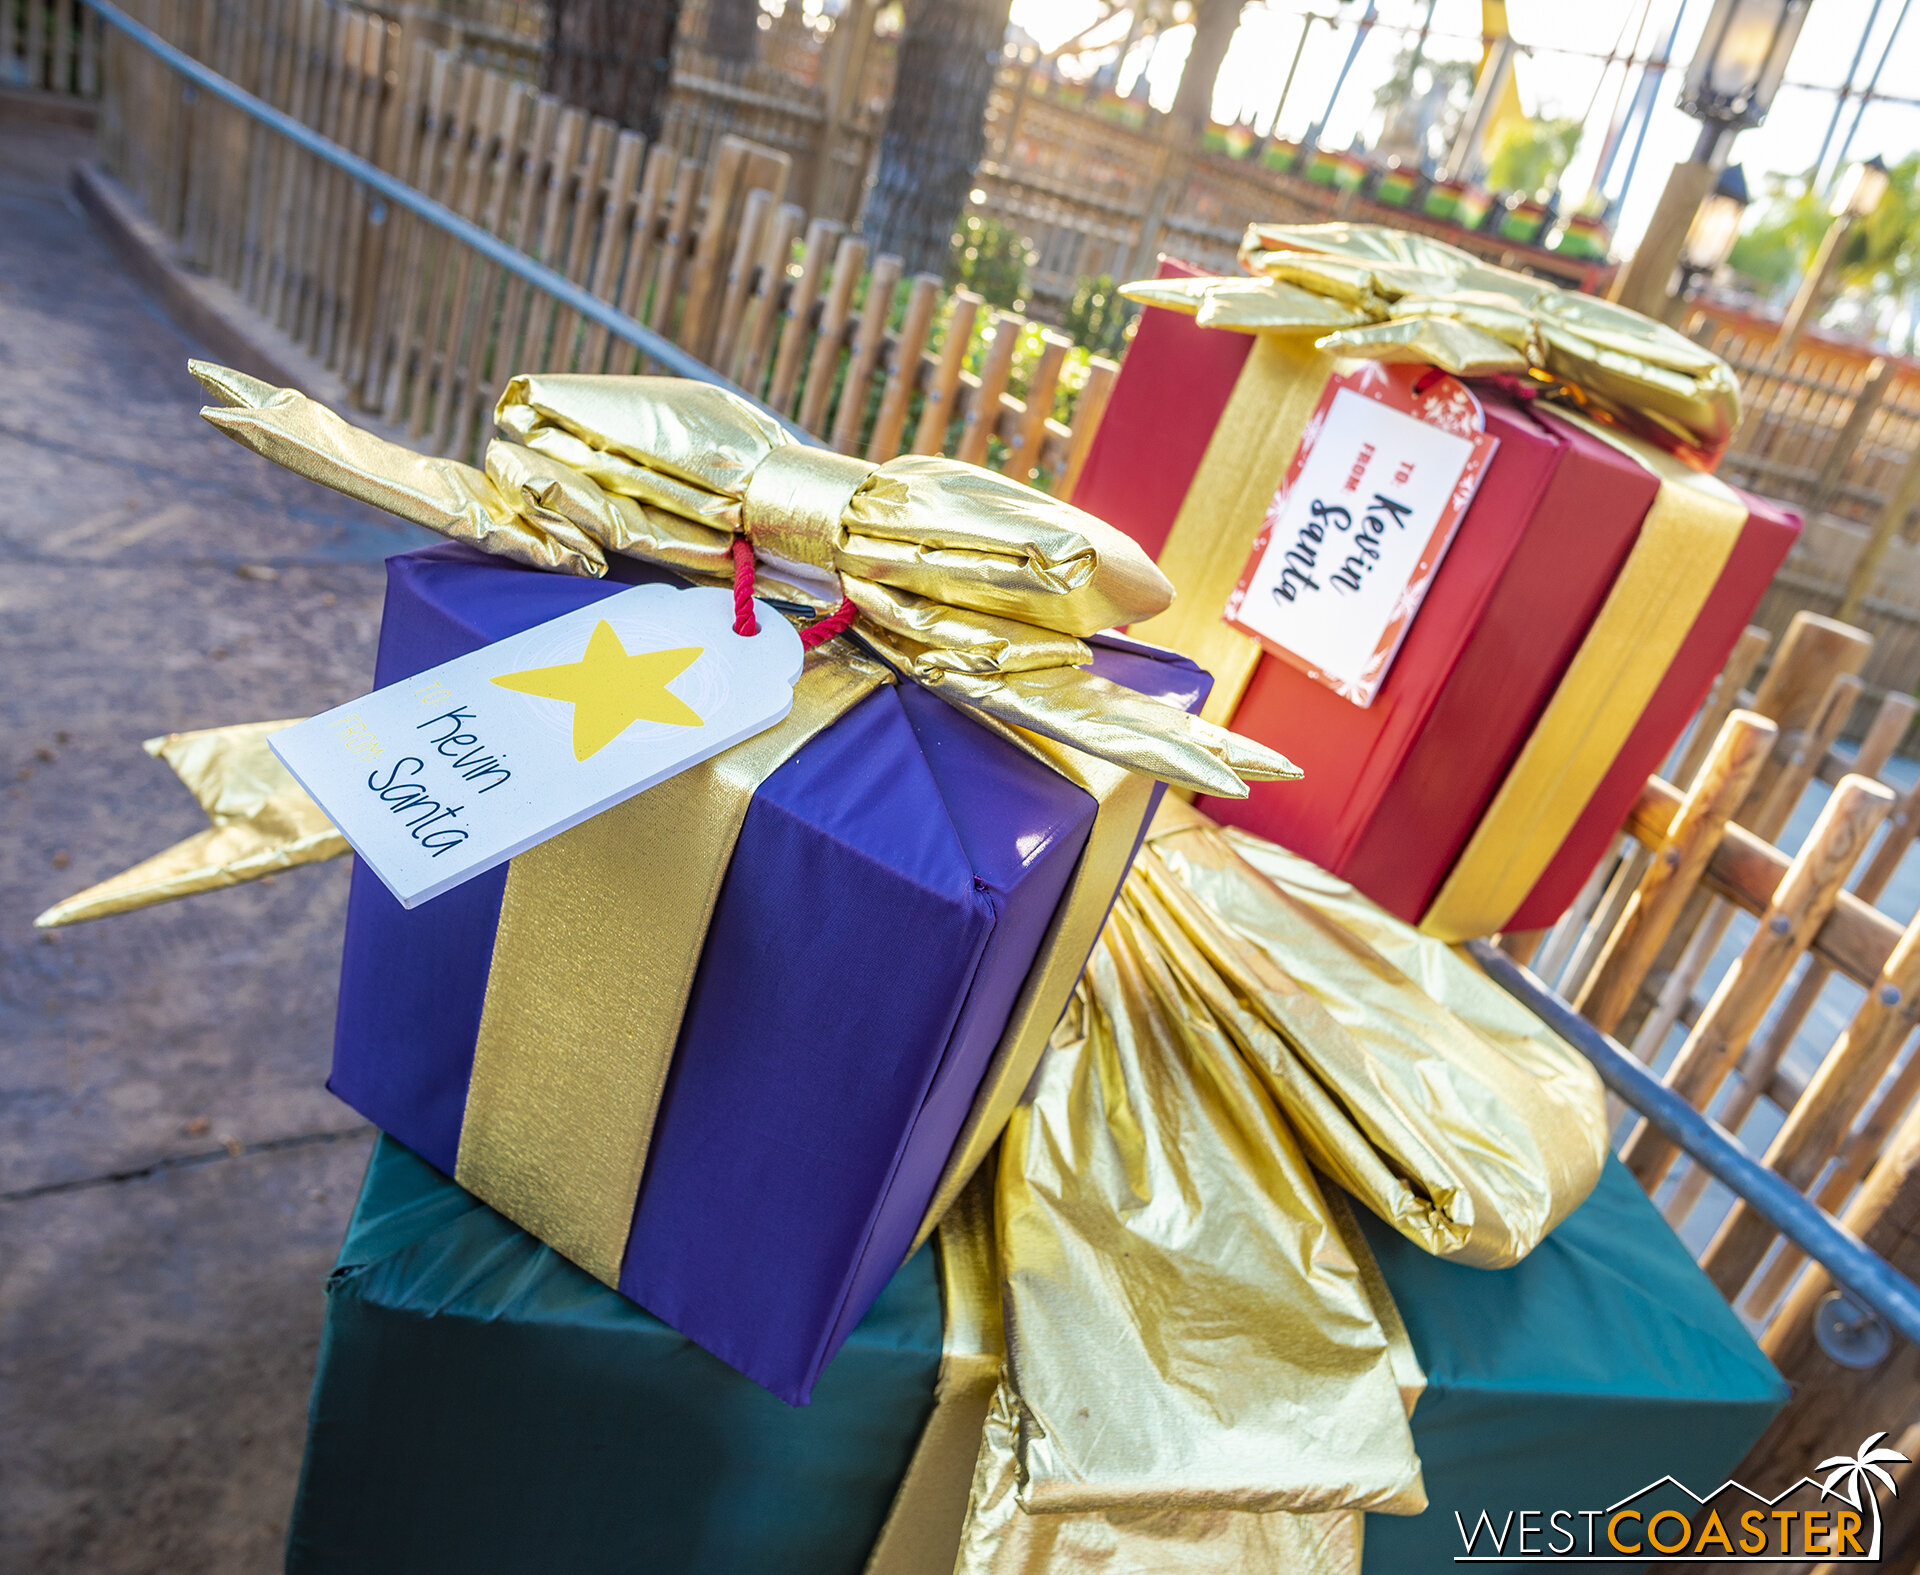  A few of the numerous presents to Kevins in Camp Snoopy.  Or perhaps it’s one Kevin, and Santa REALLY likes him? 